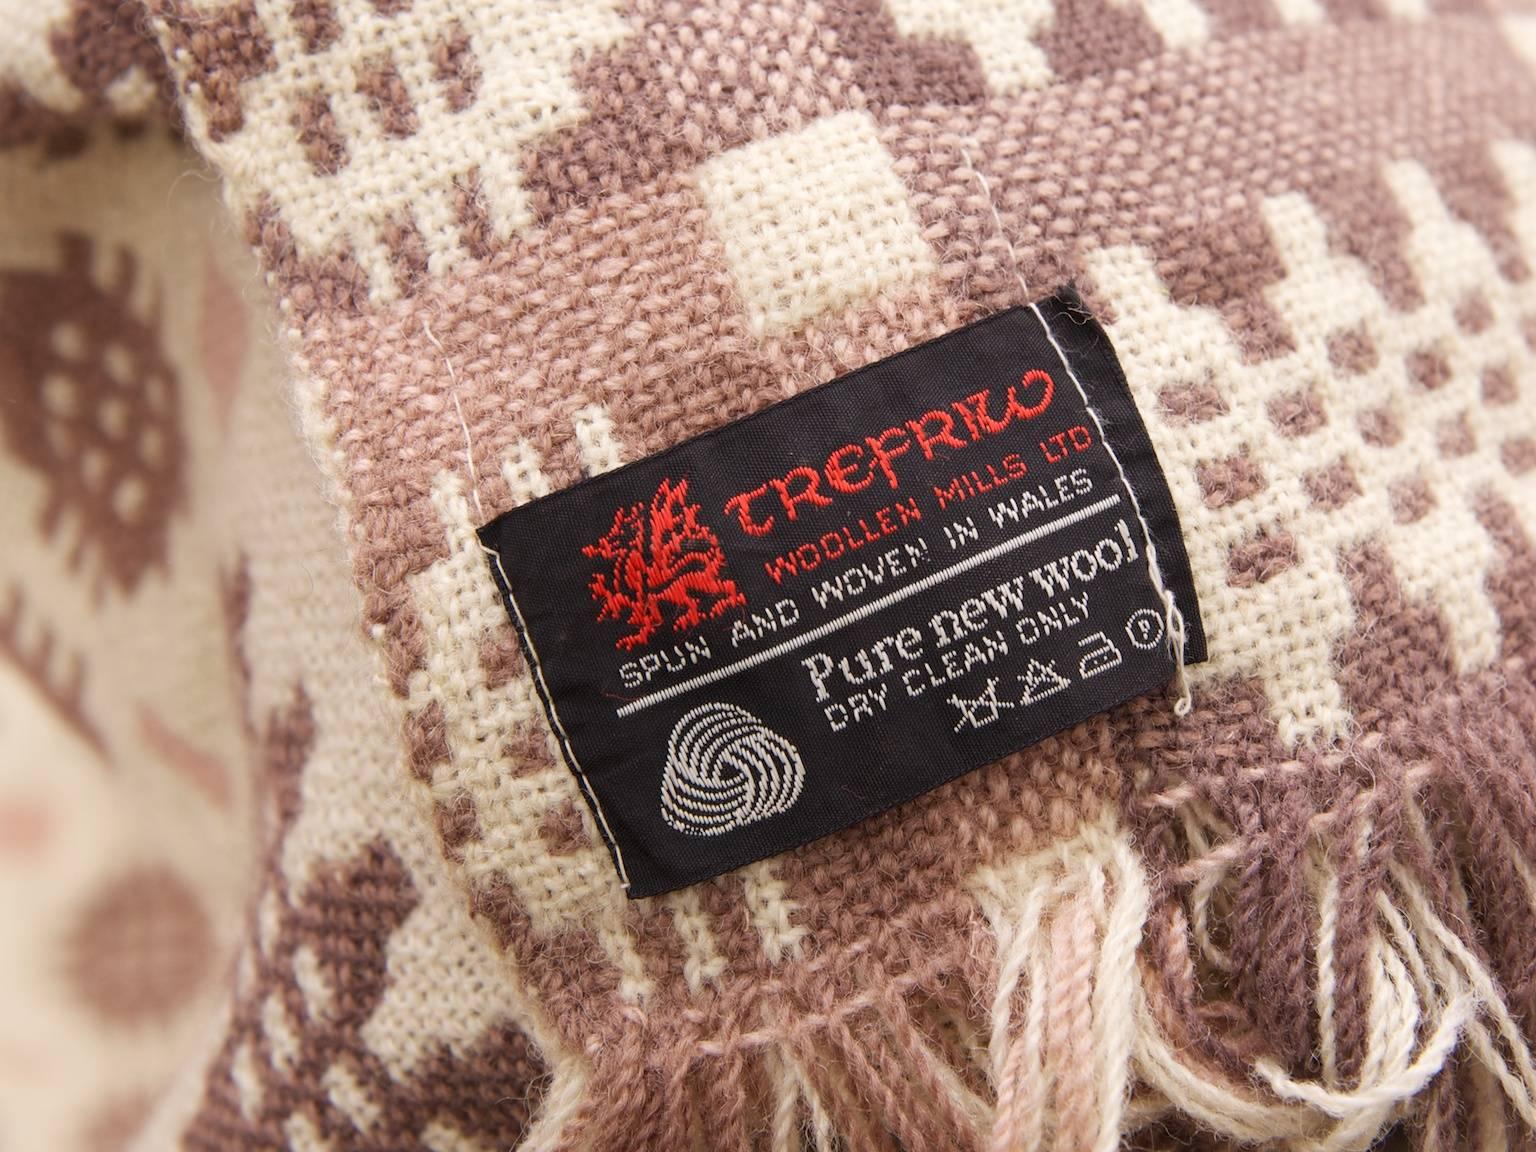 Trefriw Tapestry Blanket In Good Condition For Sale In Llandudno, Conwy